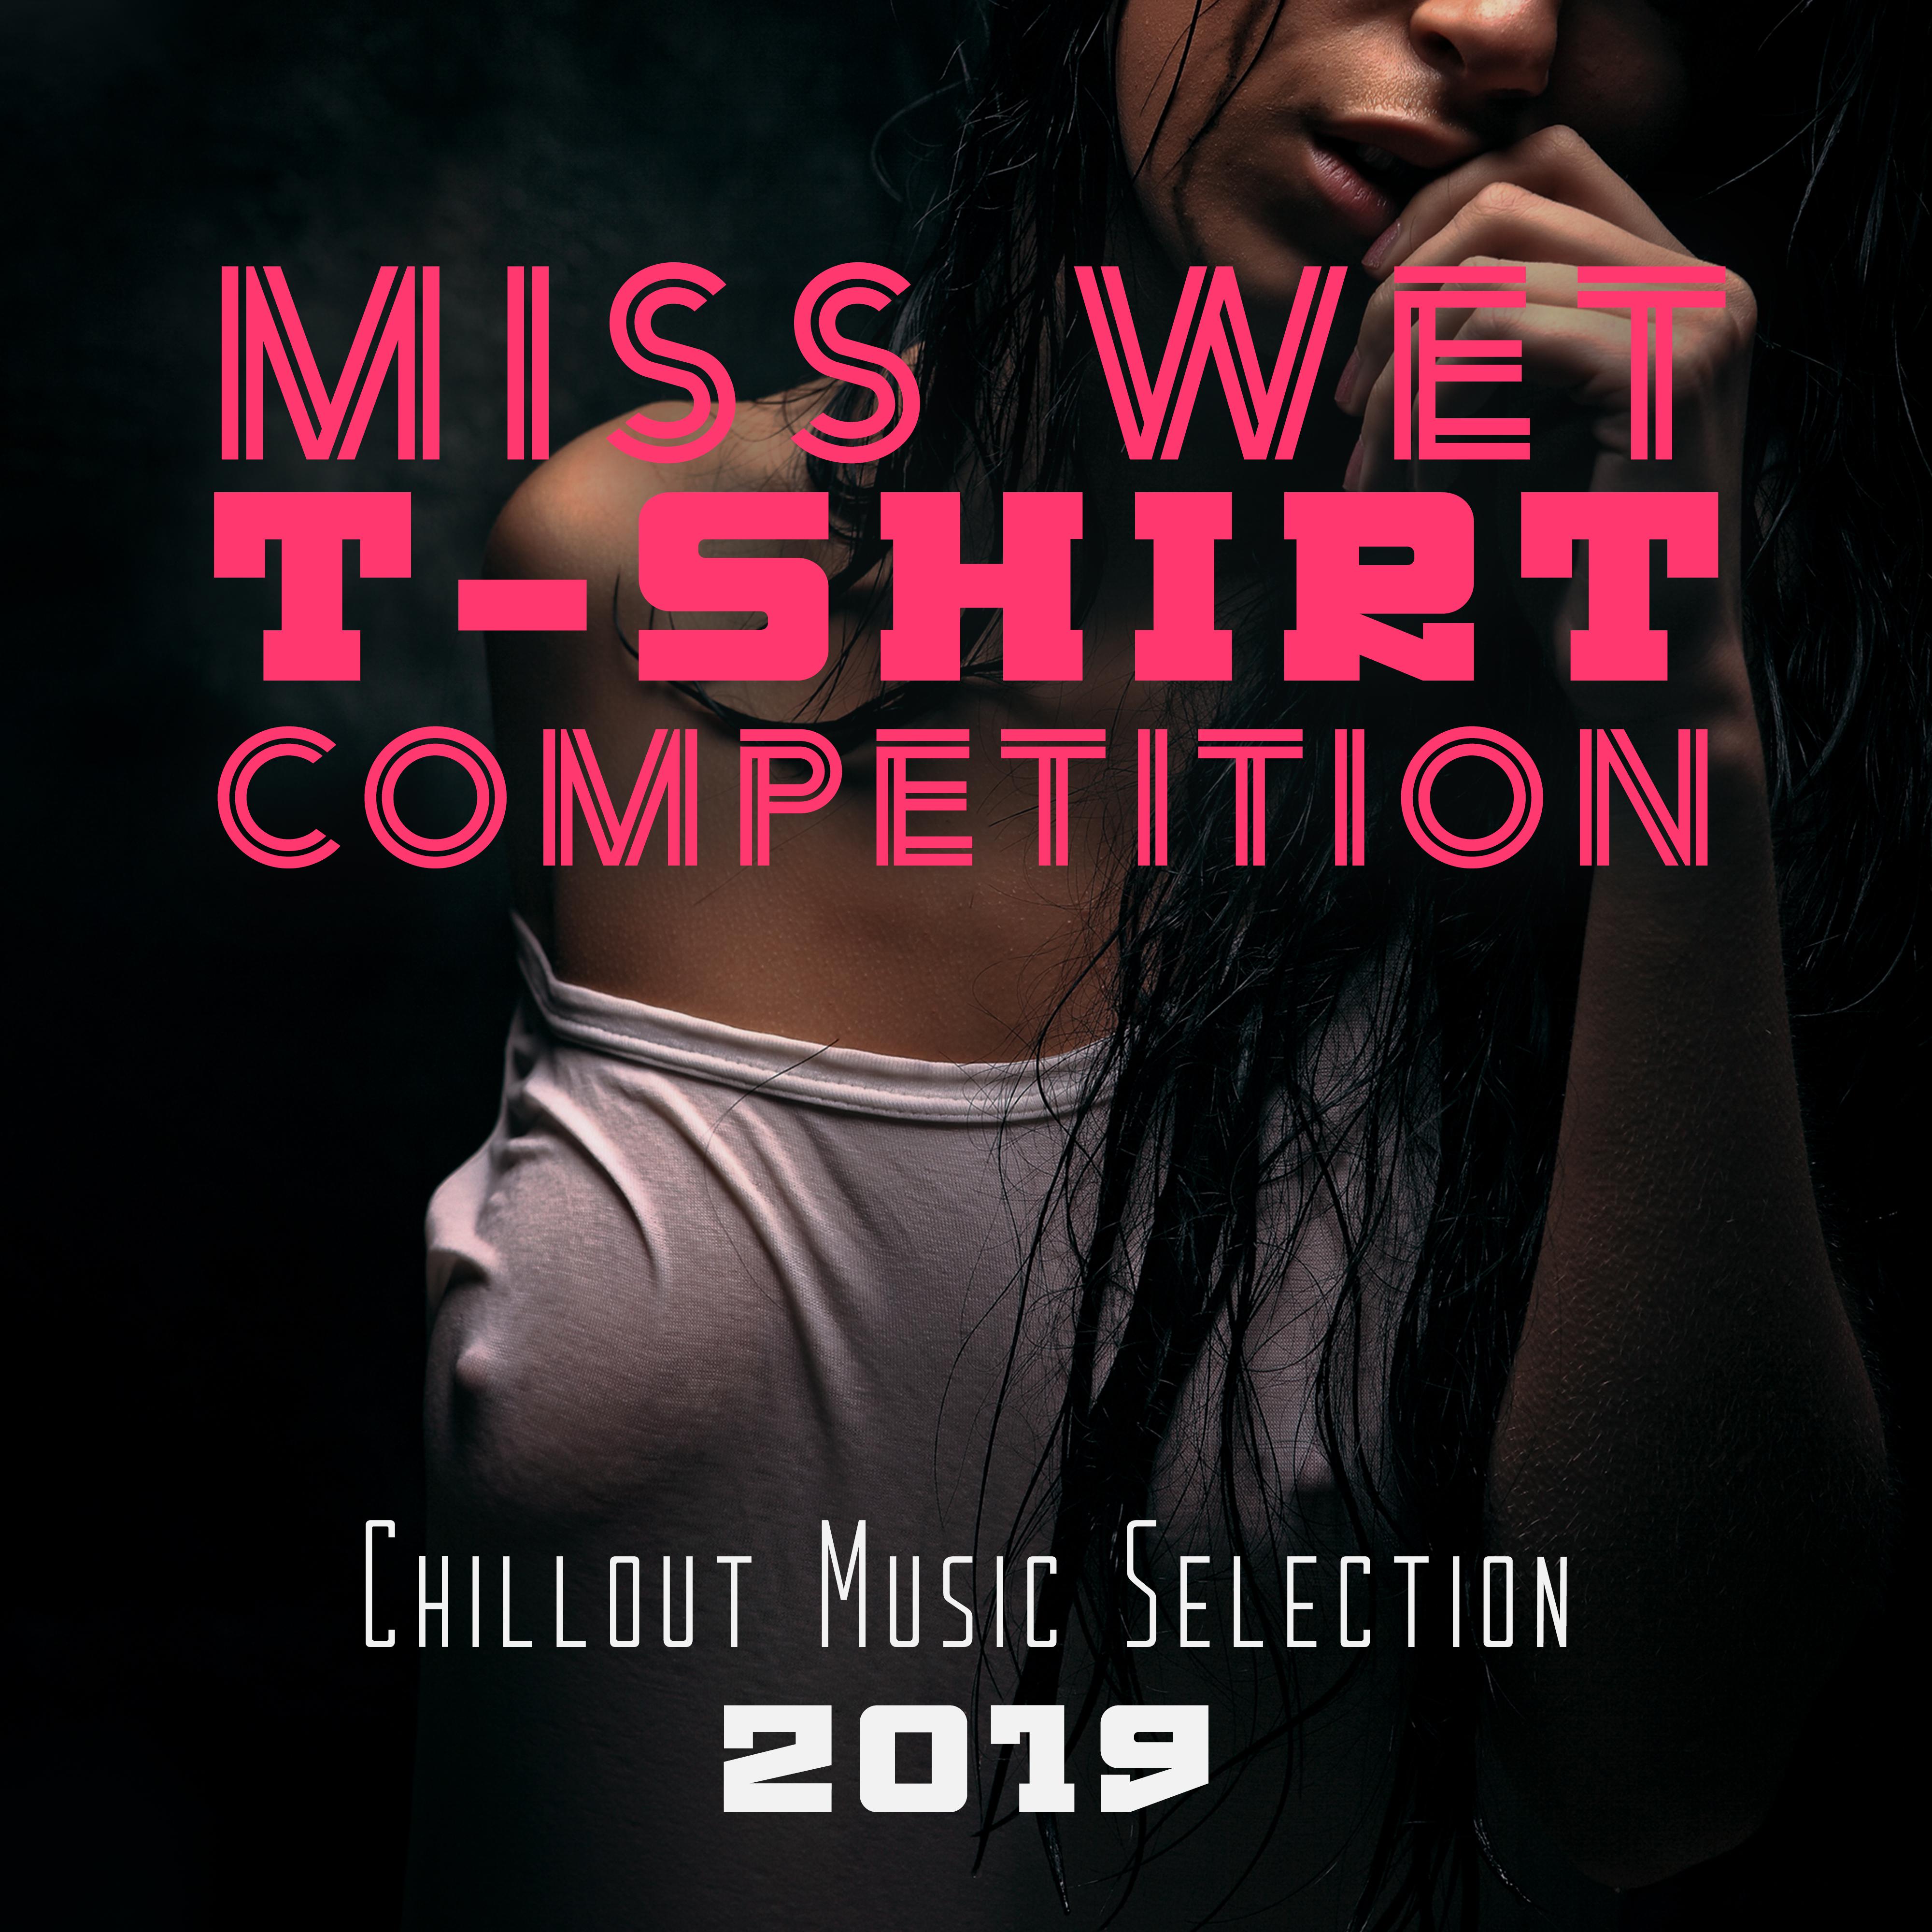 Miss Wet T-Shirt Competition Chillout Music Selection 2019